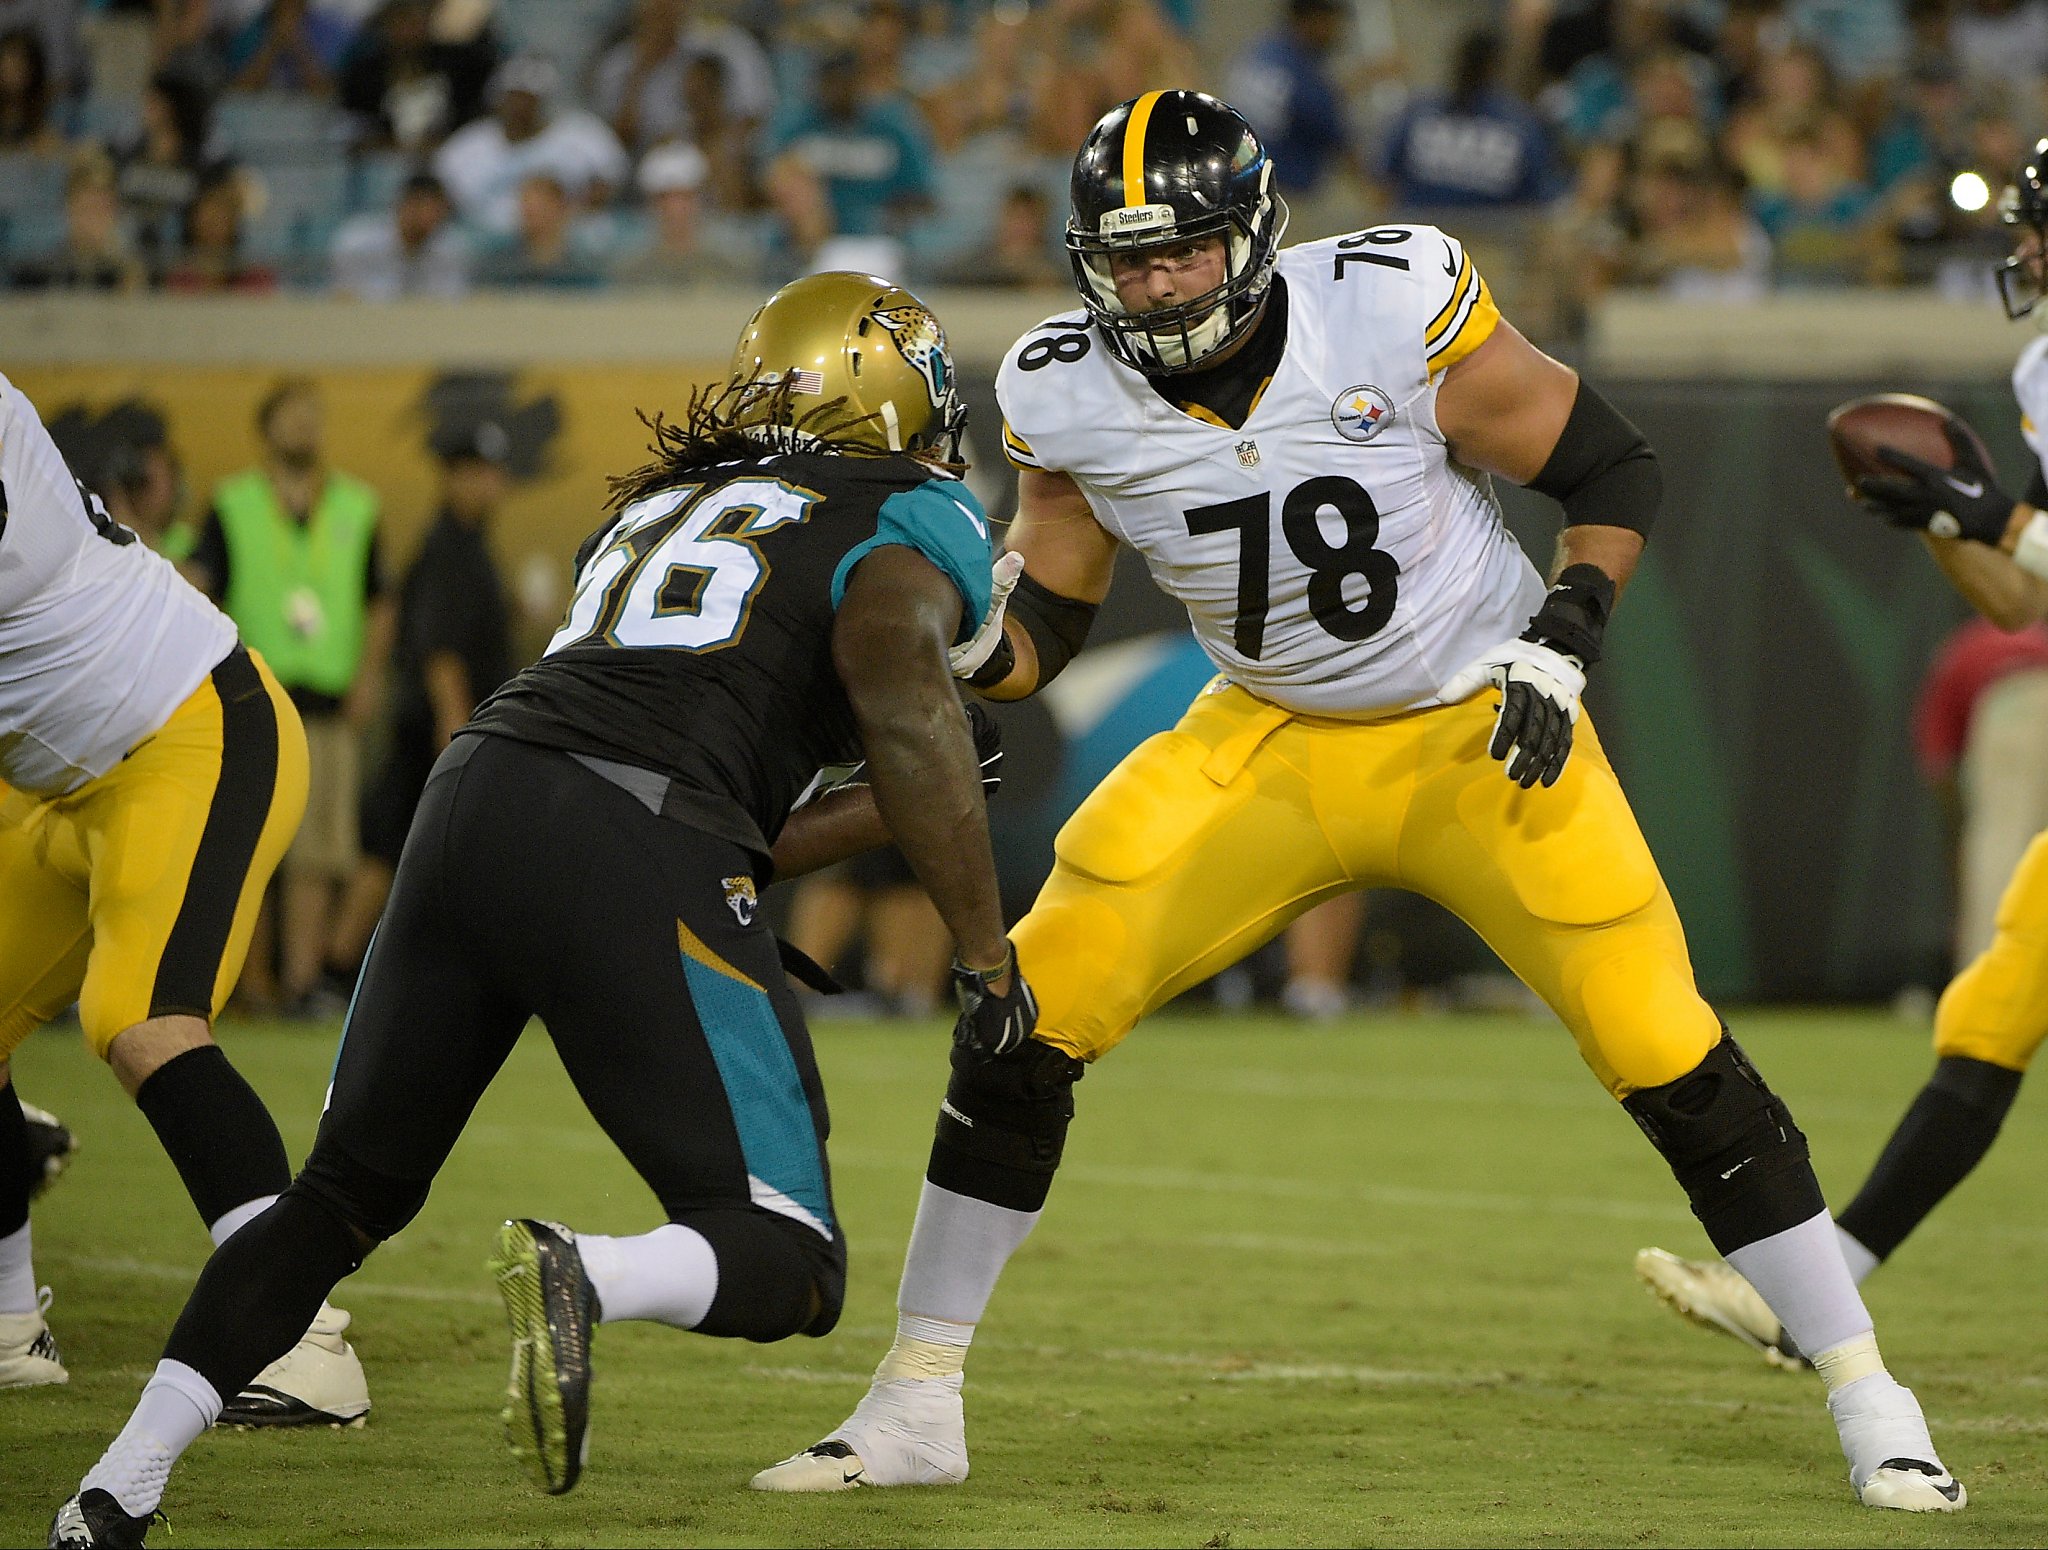 Ex-Army Ranger in the trenches with Steelers